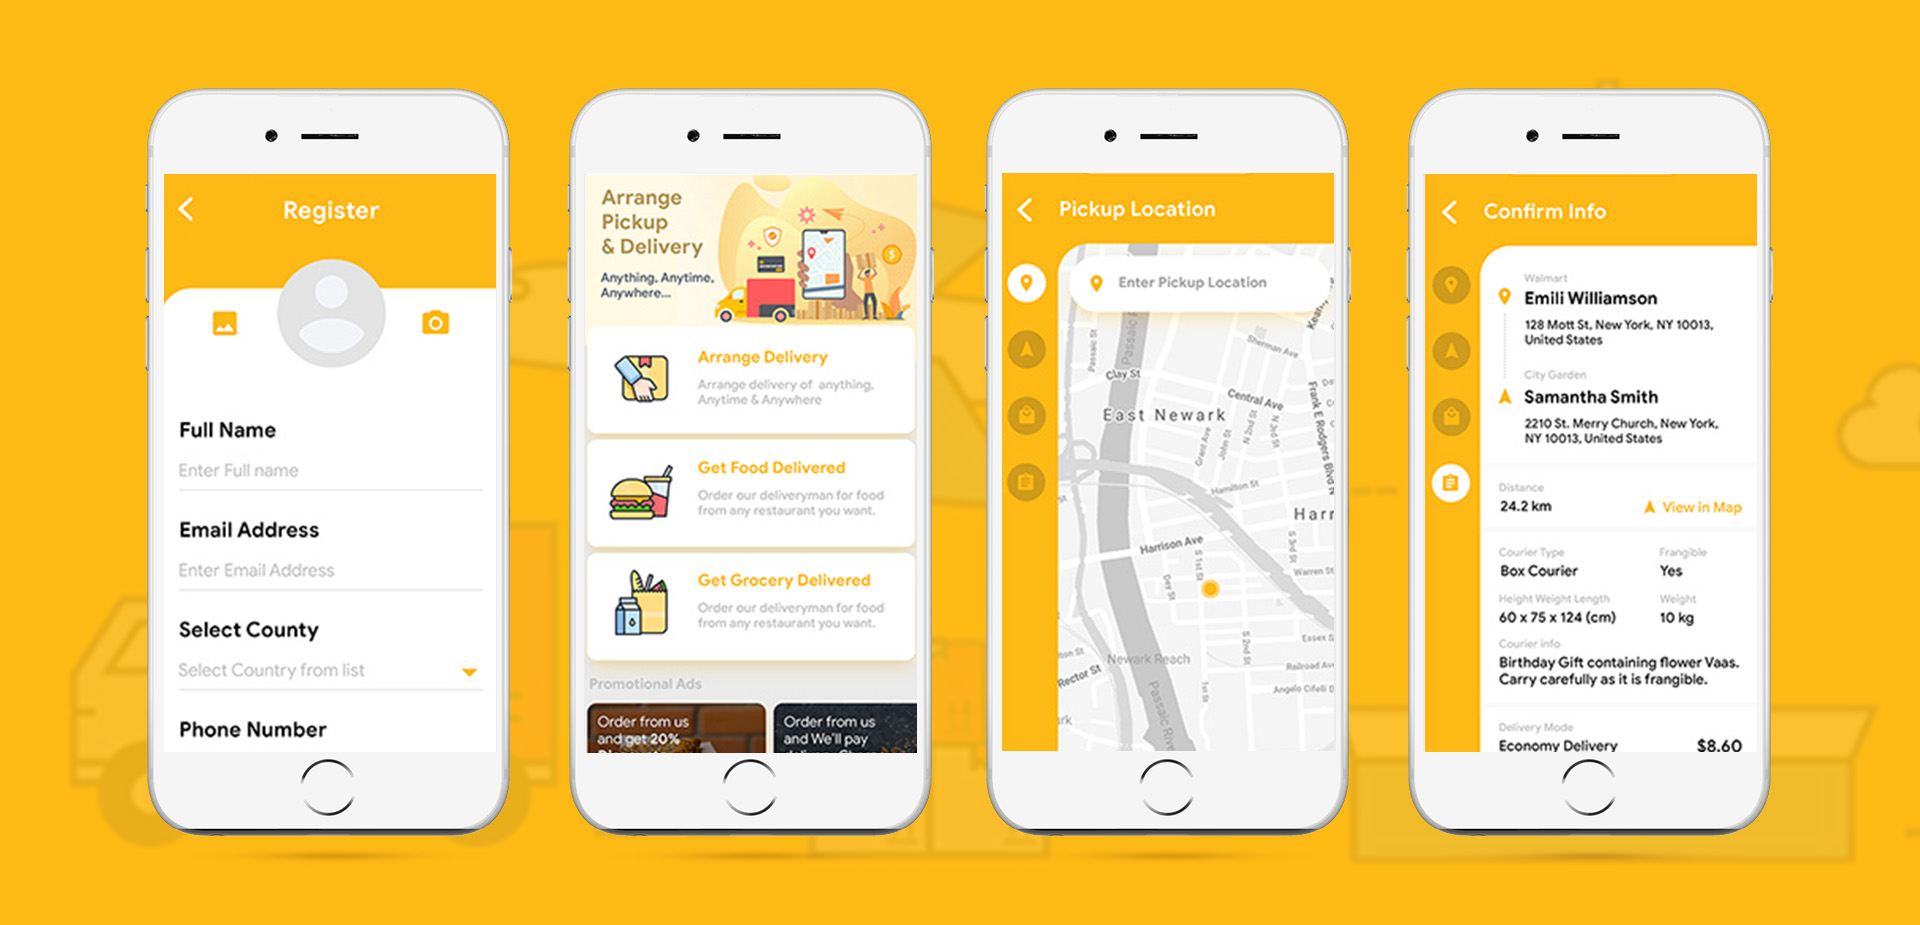 Courier Delivery App​